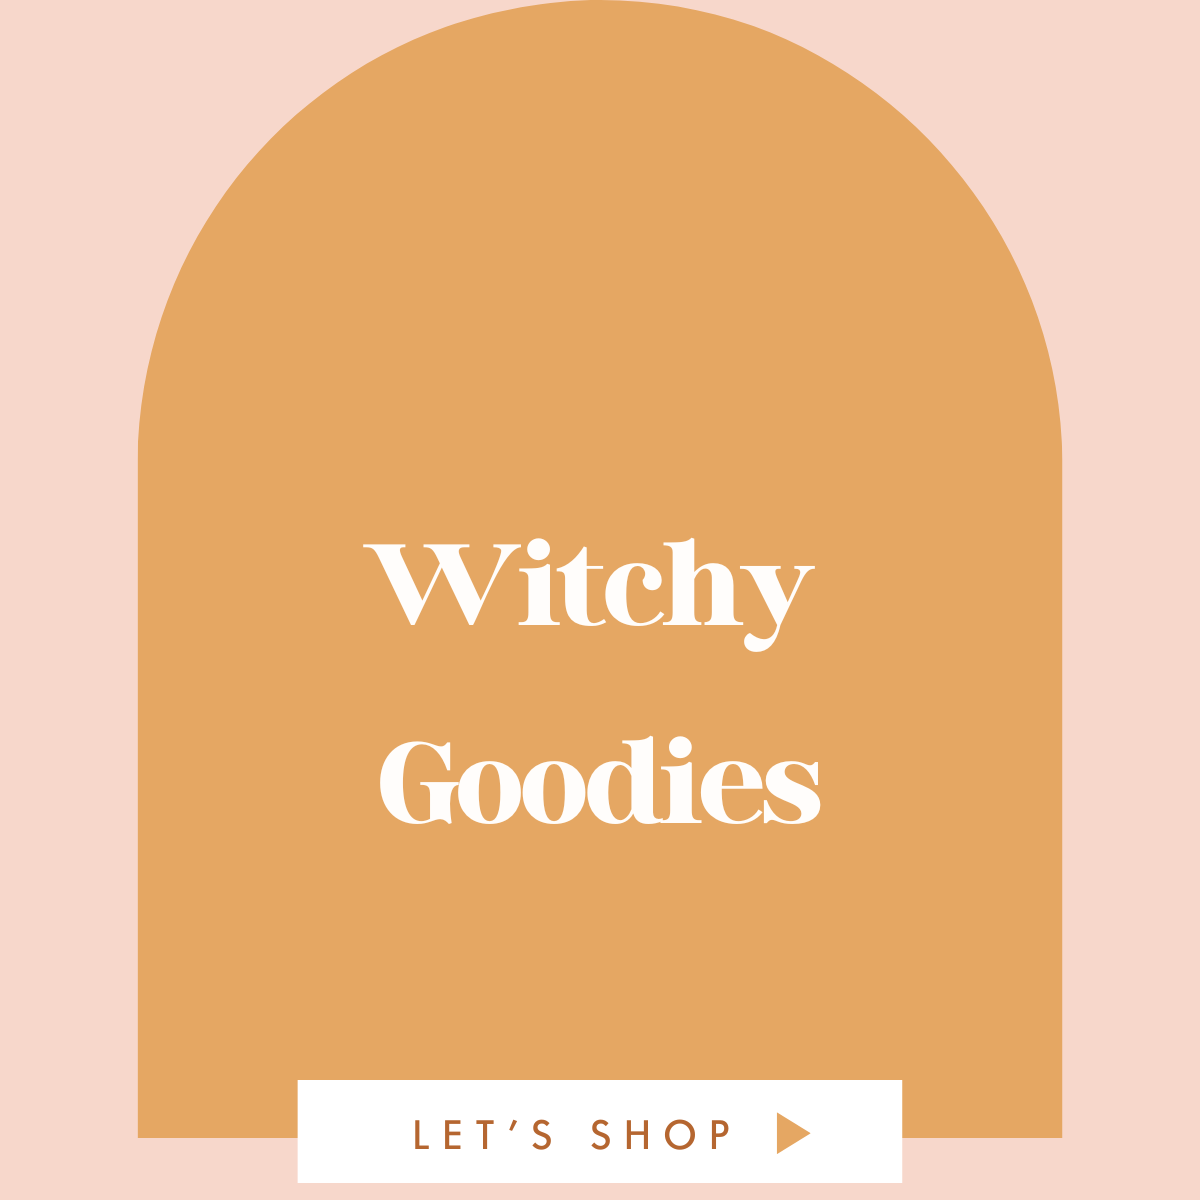 Witchy Goodies